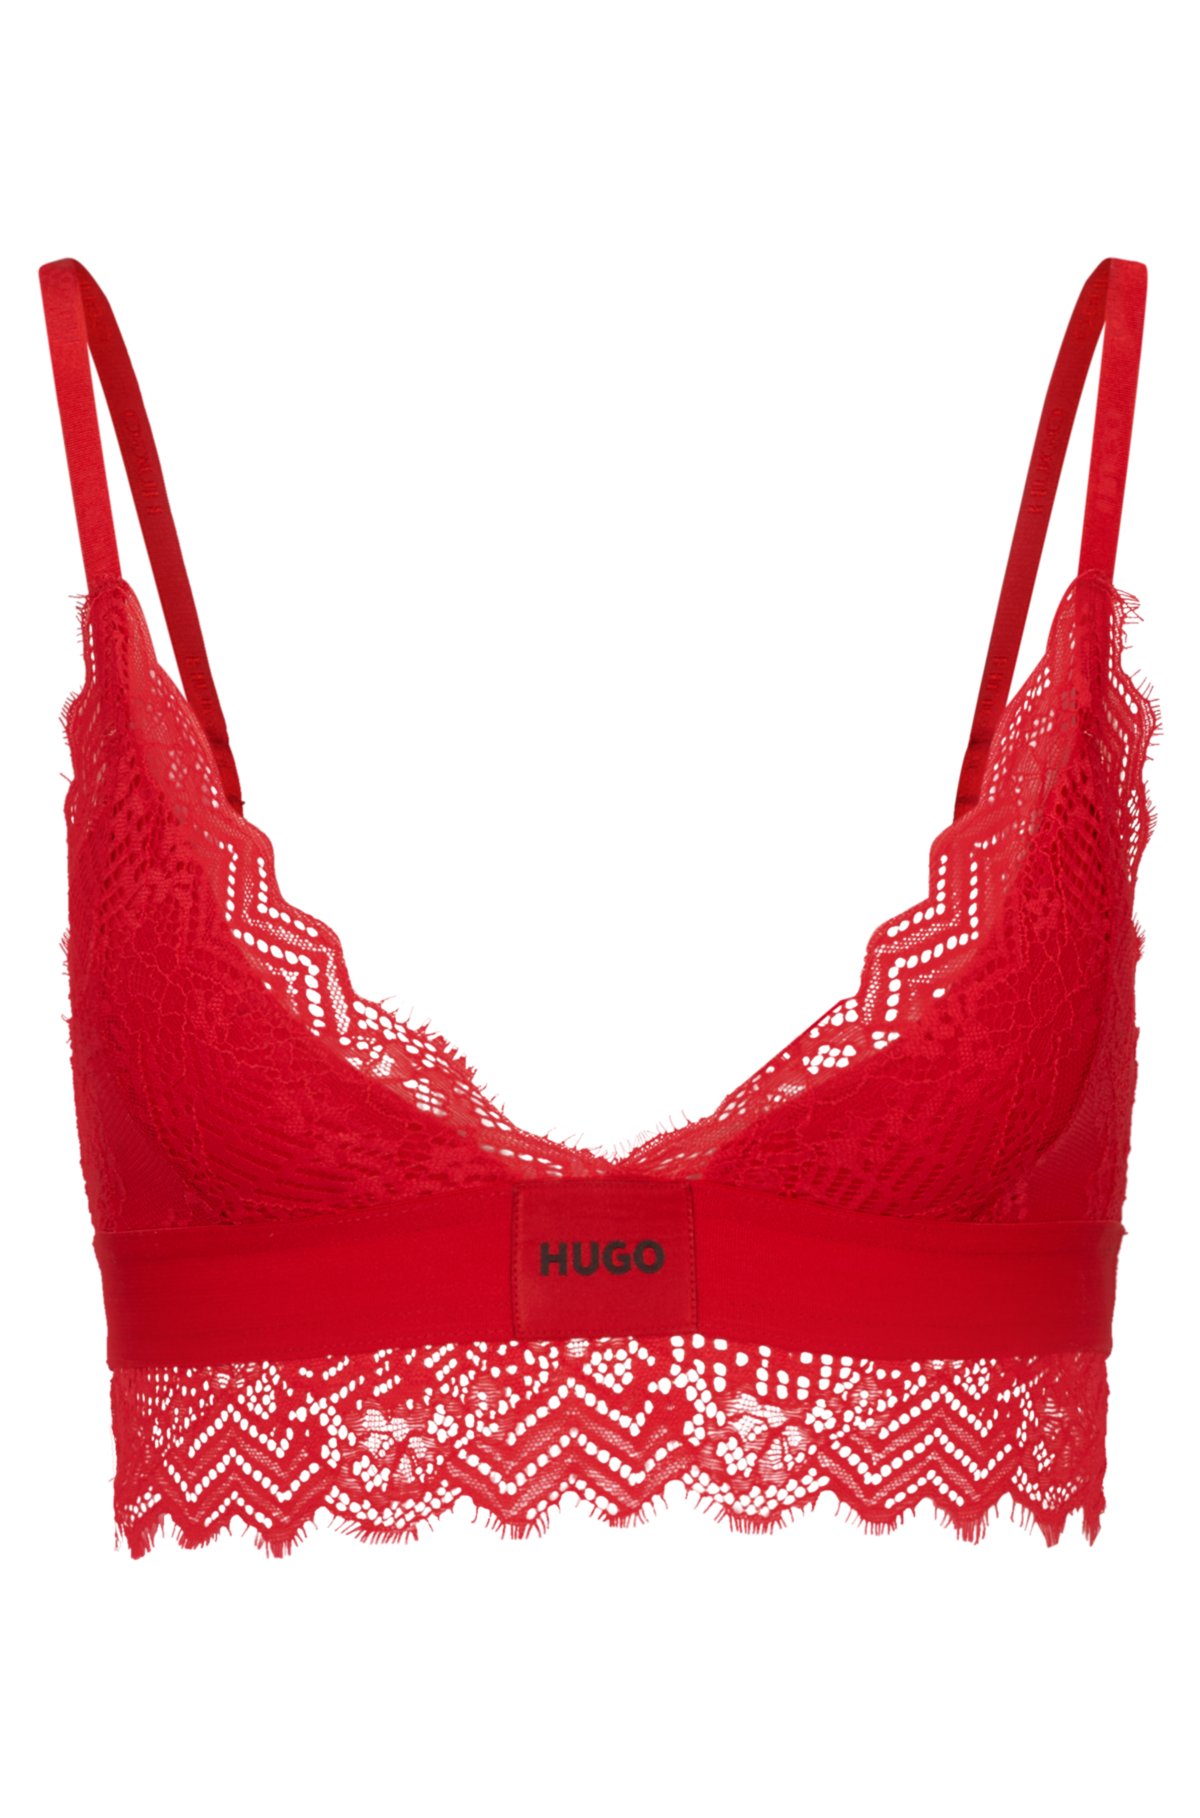 Guess Red Satin Triangle Bra Size M